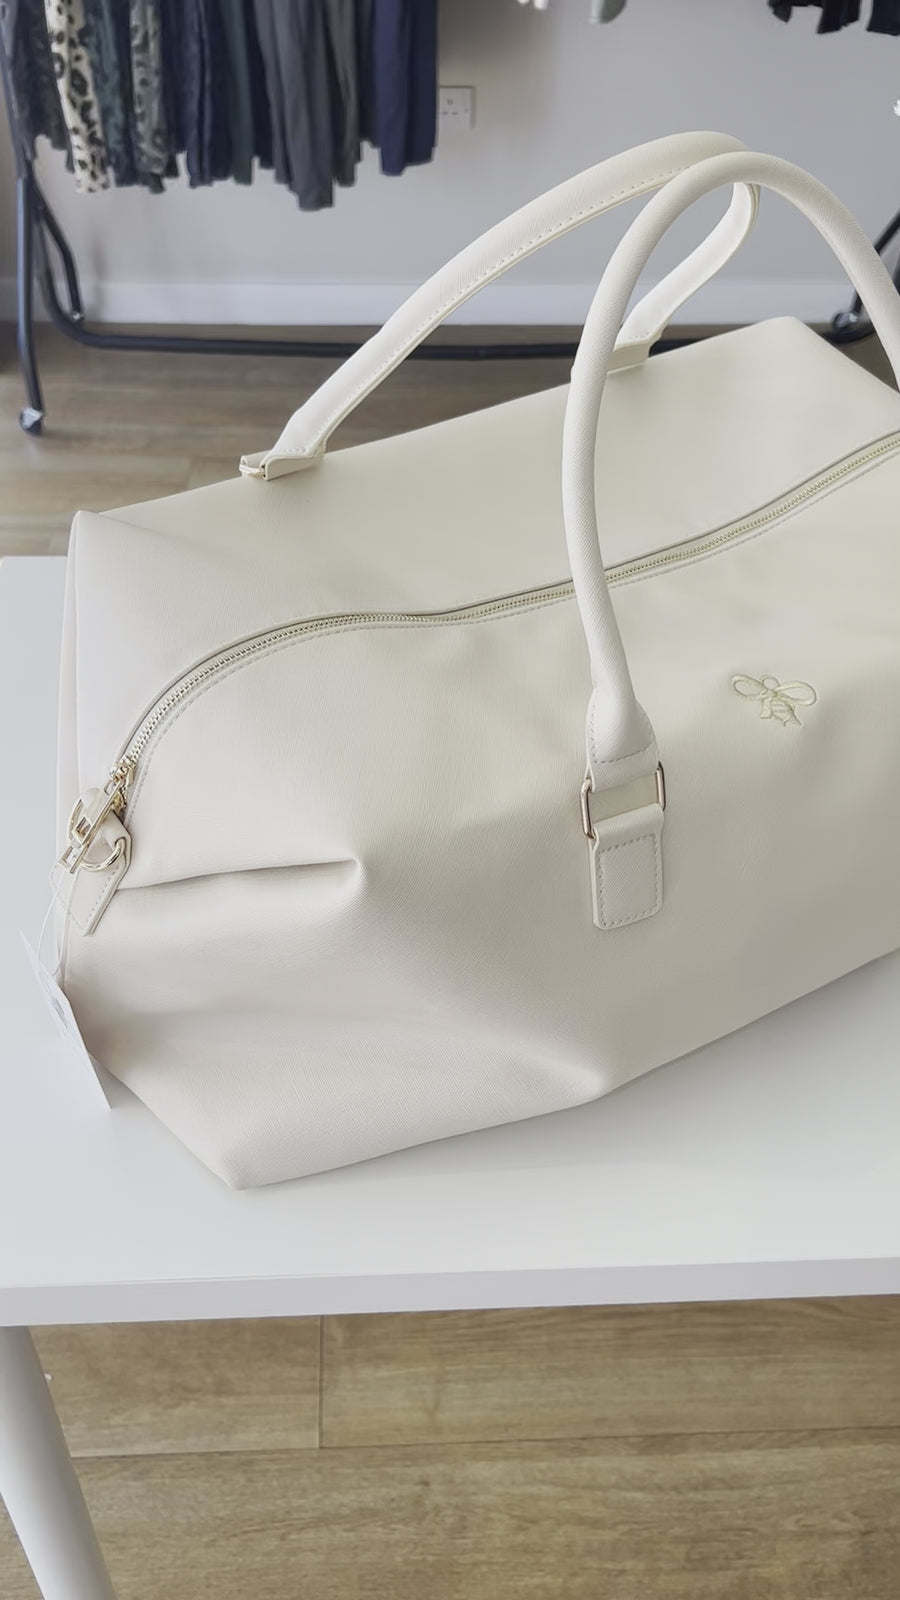 The Weekend Bag - Oyster